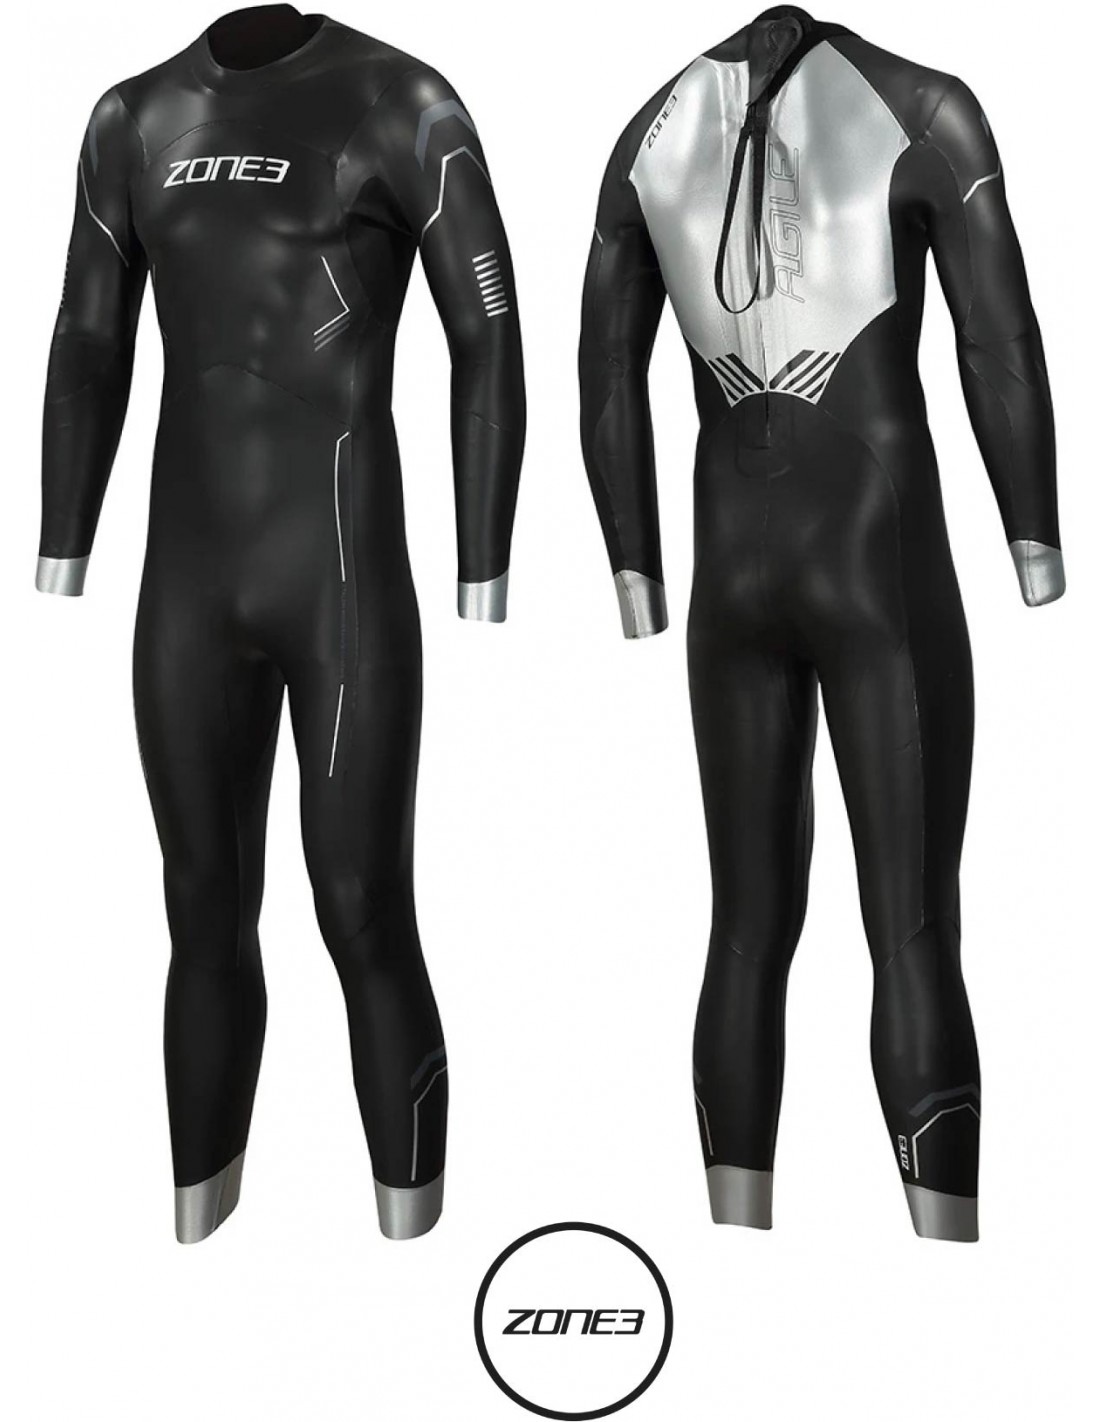 Zone3 Men's Agile Wetsuit for thriathlon and open water swimming